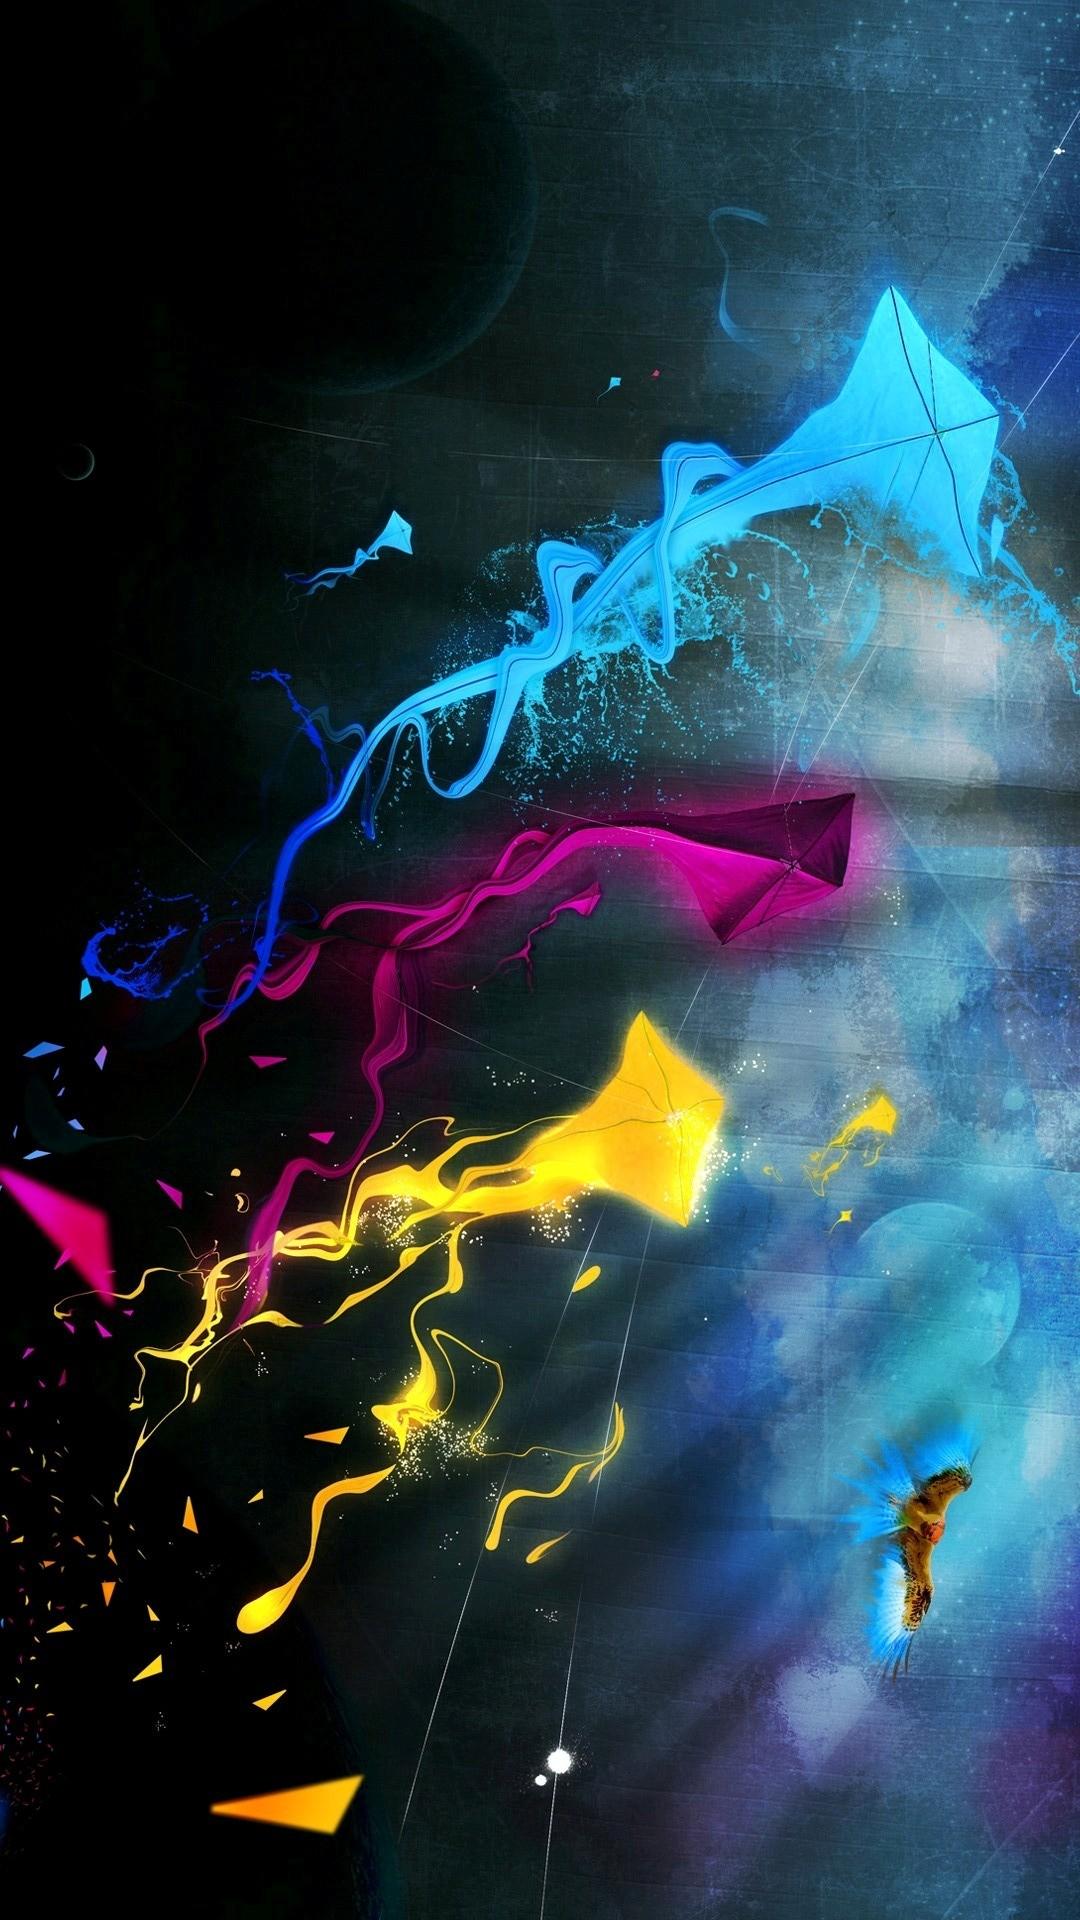 HD Wallpaper for Phone